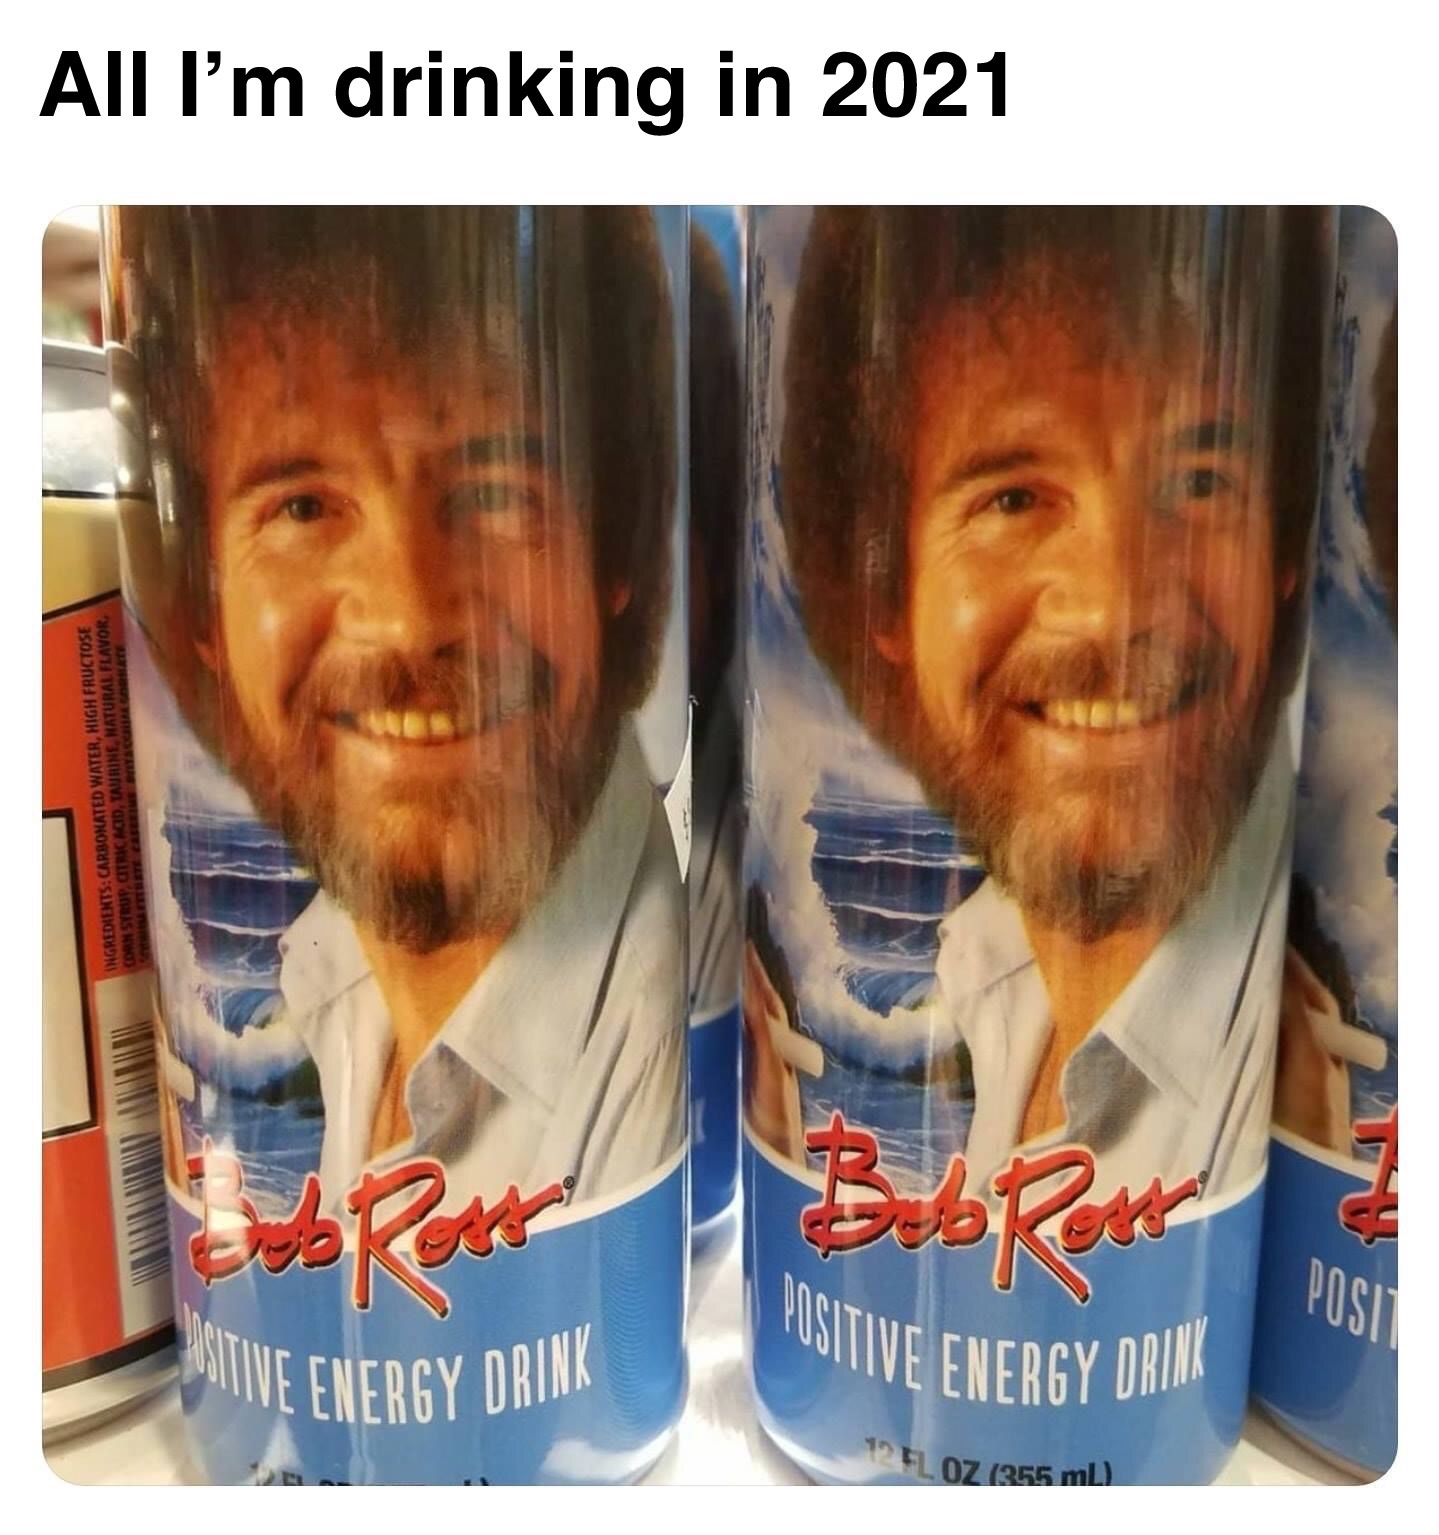 bob ross positive energy drinks meme - Sitive Energy Drink Positive Energy Drink All I'm drinking in 2021 Ingredients Carbonated Water, High Fructose Stawy Ctrag Acid, Tuming, Matural Flavor, Lisoo Oz 355 ml